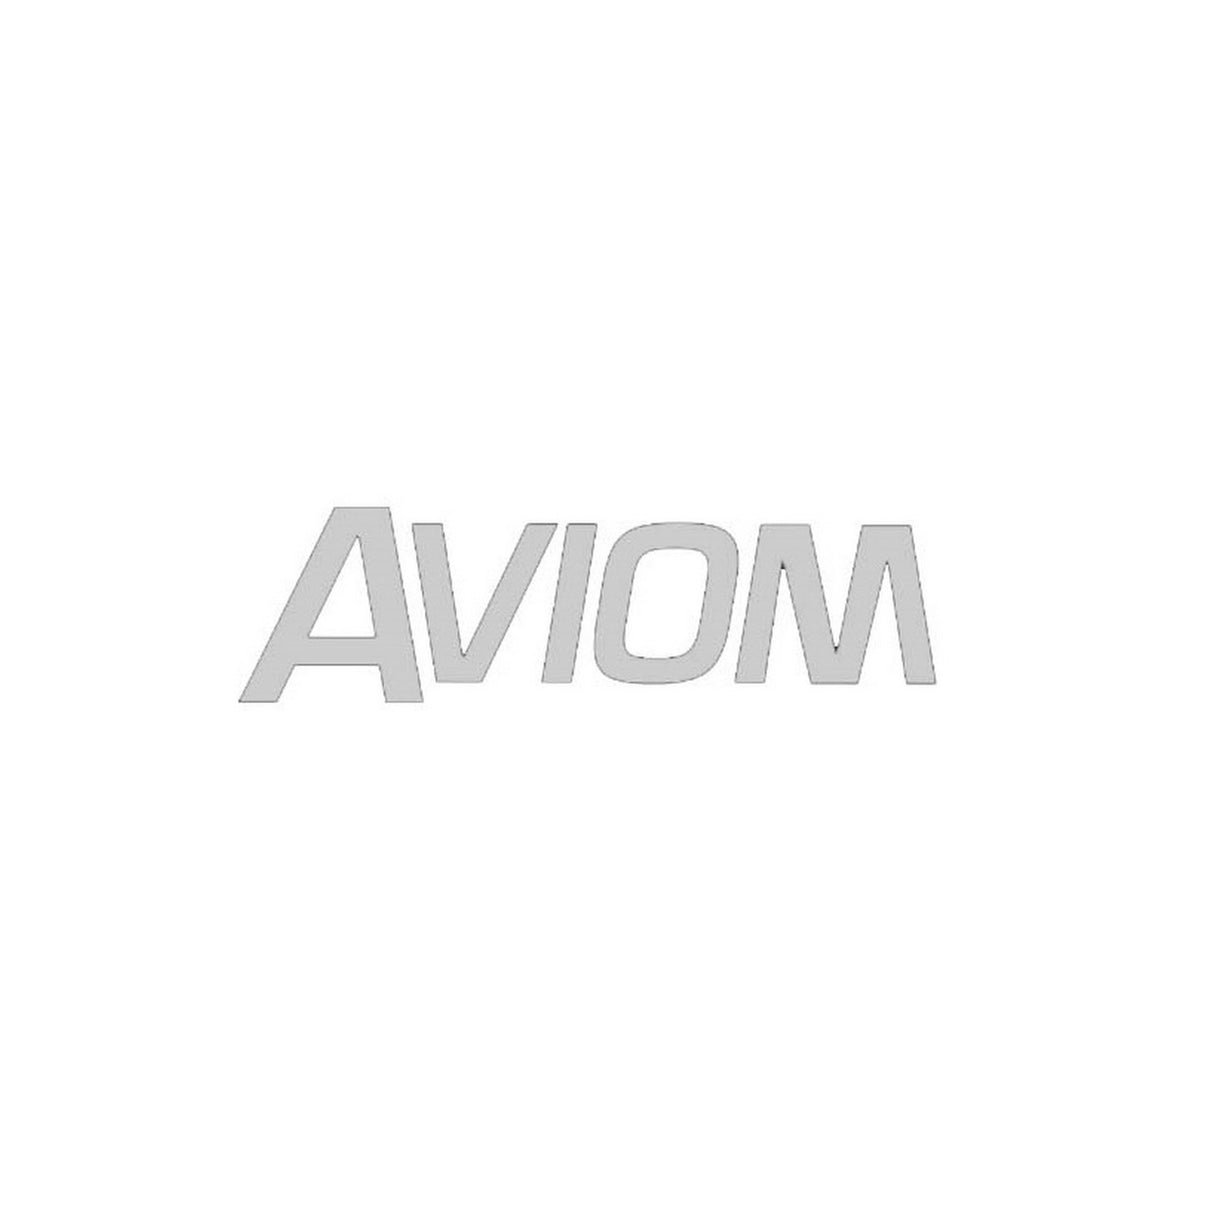 Aviom KBS-1 Keyboard Seat with Tactile Transducer for BOOM-1